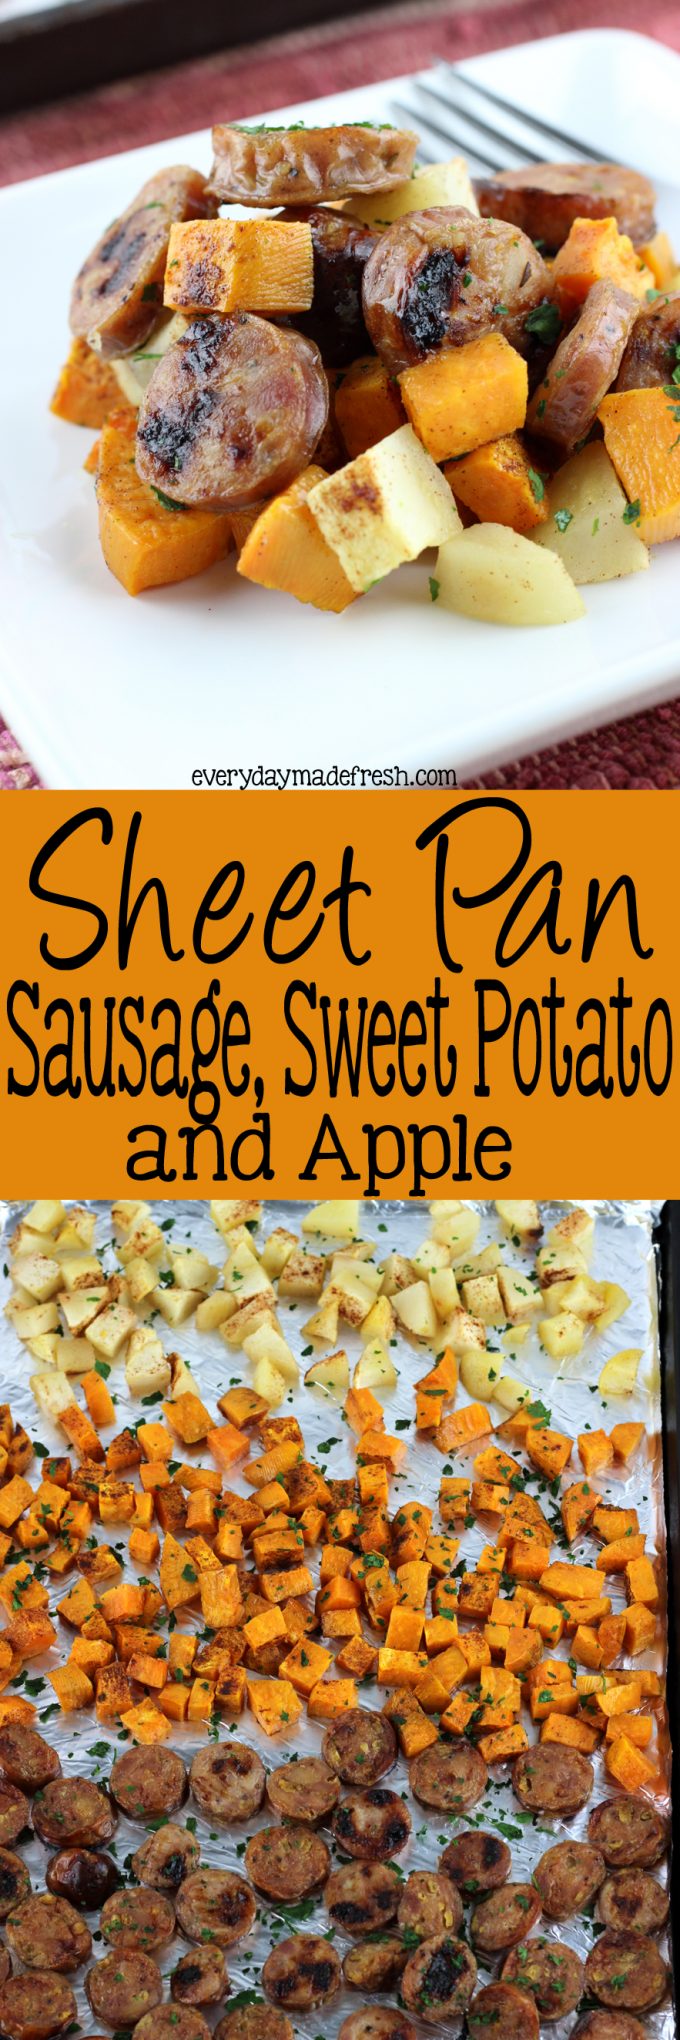 Sheet Pan Sausage, Sweet Potato, and Apple is a no fuss, quick dinner to enjoy any night of the week! All you need is a few simple ingredients. | EverydayMadeFresh.com